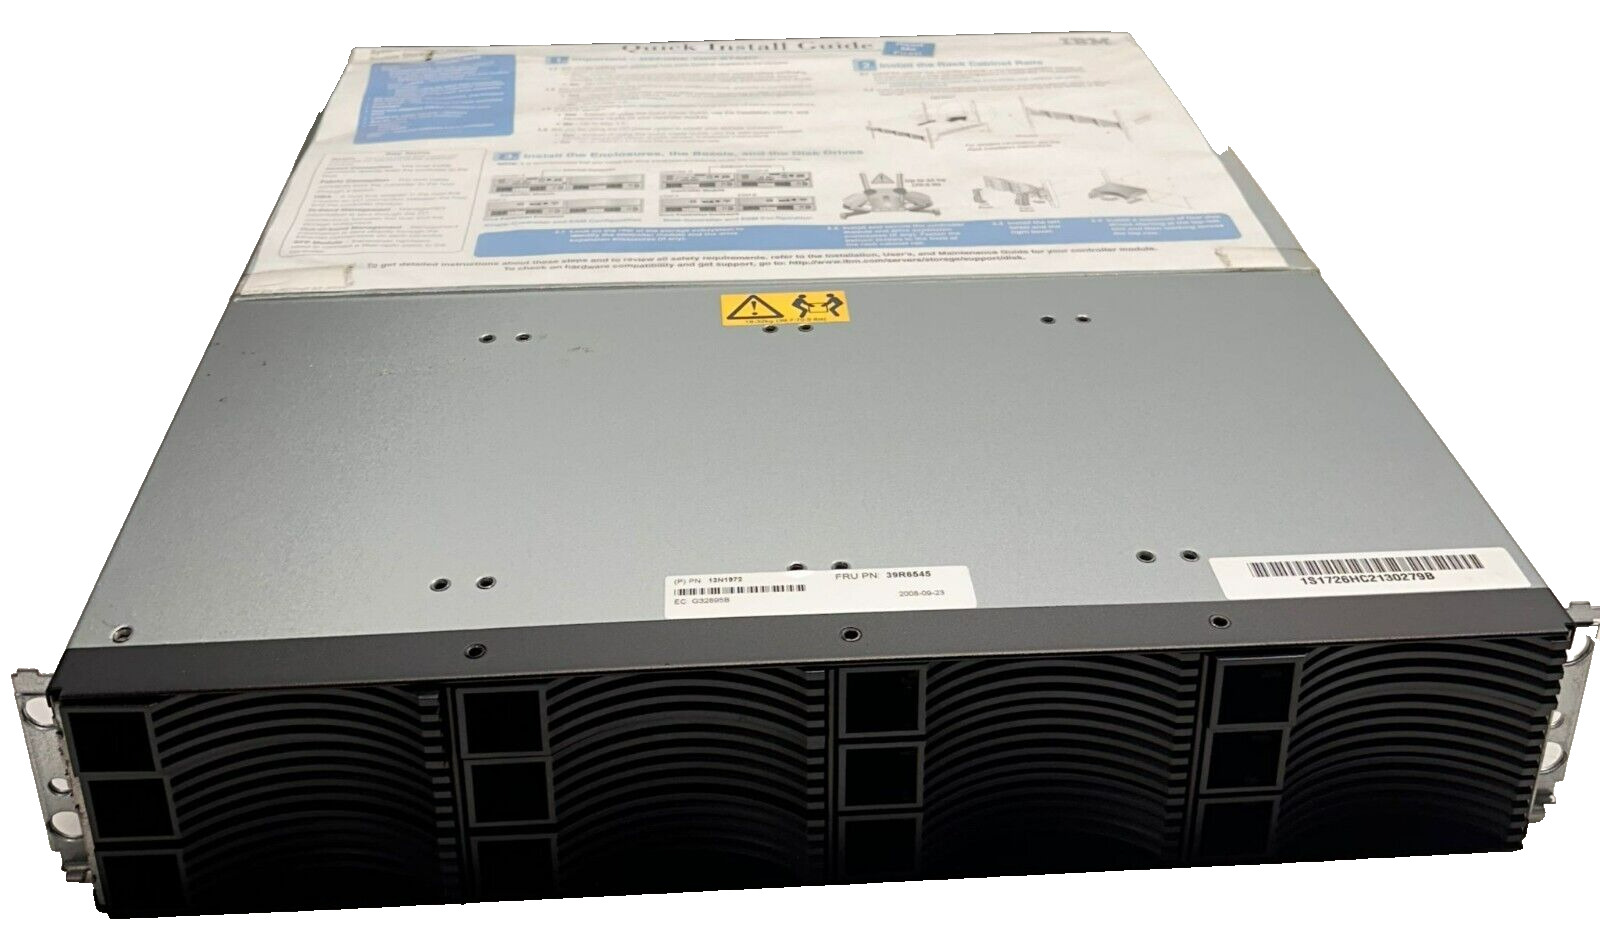 IBM System Storage Disk Drive DS3200, DS3300, DS3400